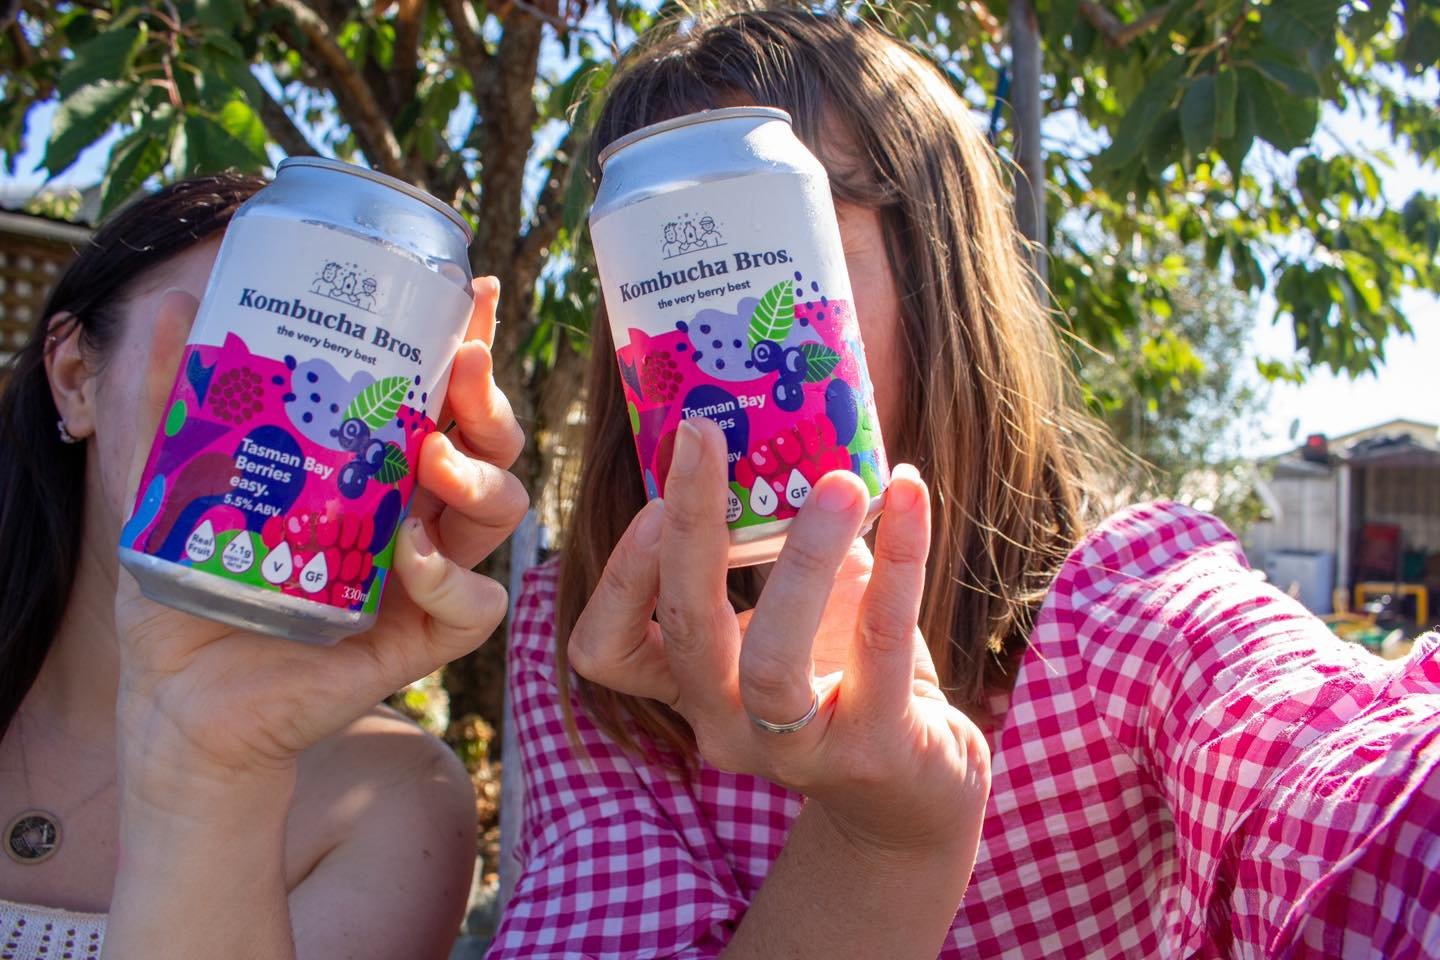 Cheers to friendship and fizz! 🥂❤️Share the kombucha love with your partner in bubbles - because good times are best enjoyed with great company! Tag your kombucha buddy below! 😍
#KombuchaConnection #BubblyBuddies

#kombucha #KombuchaLife #BrewYourO